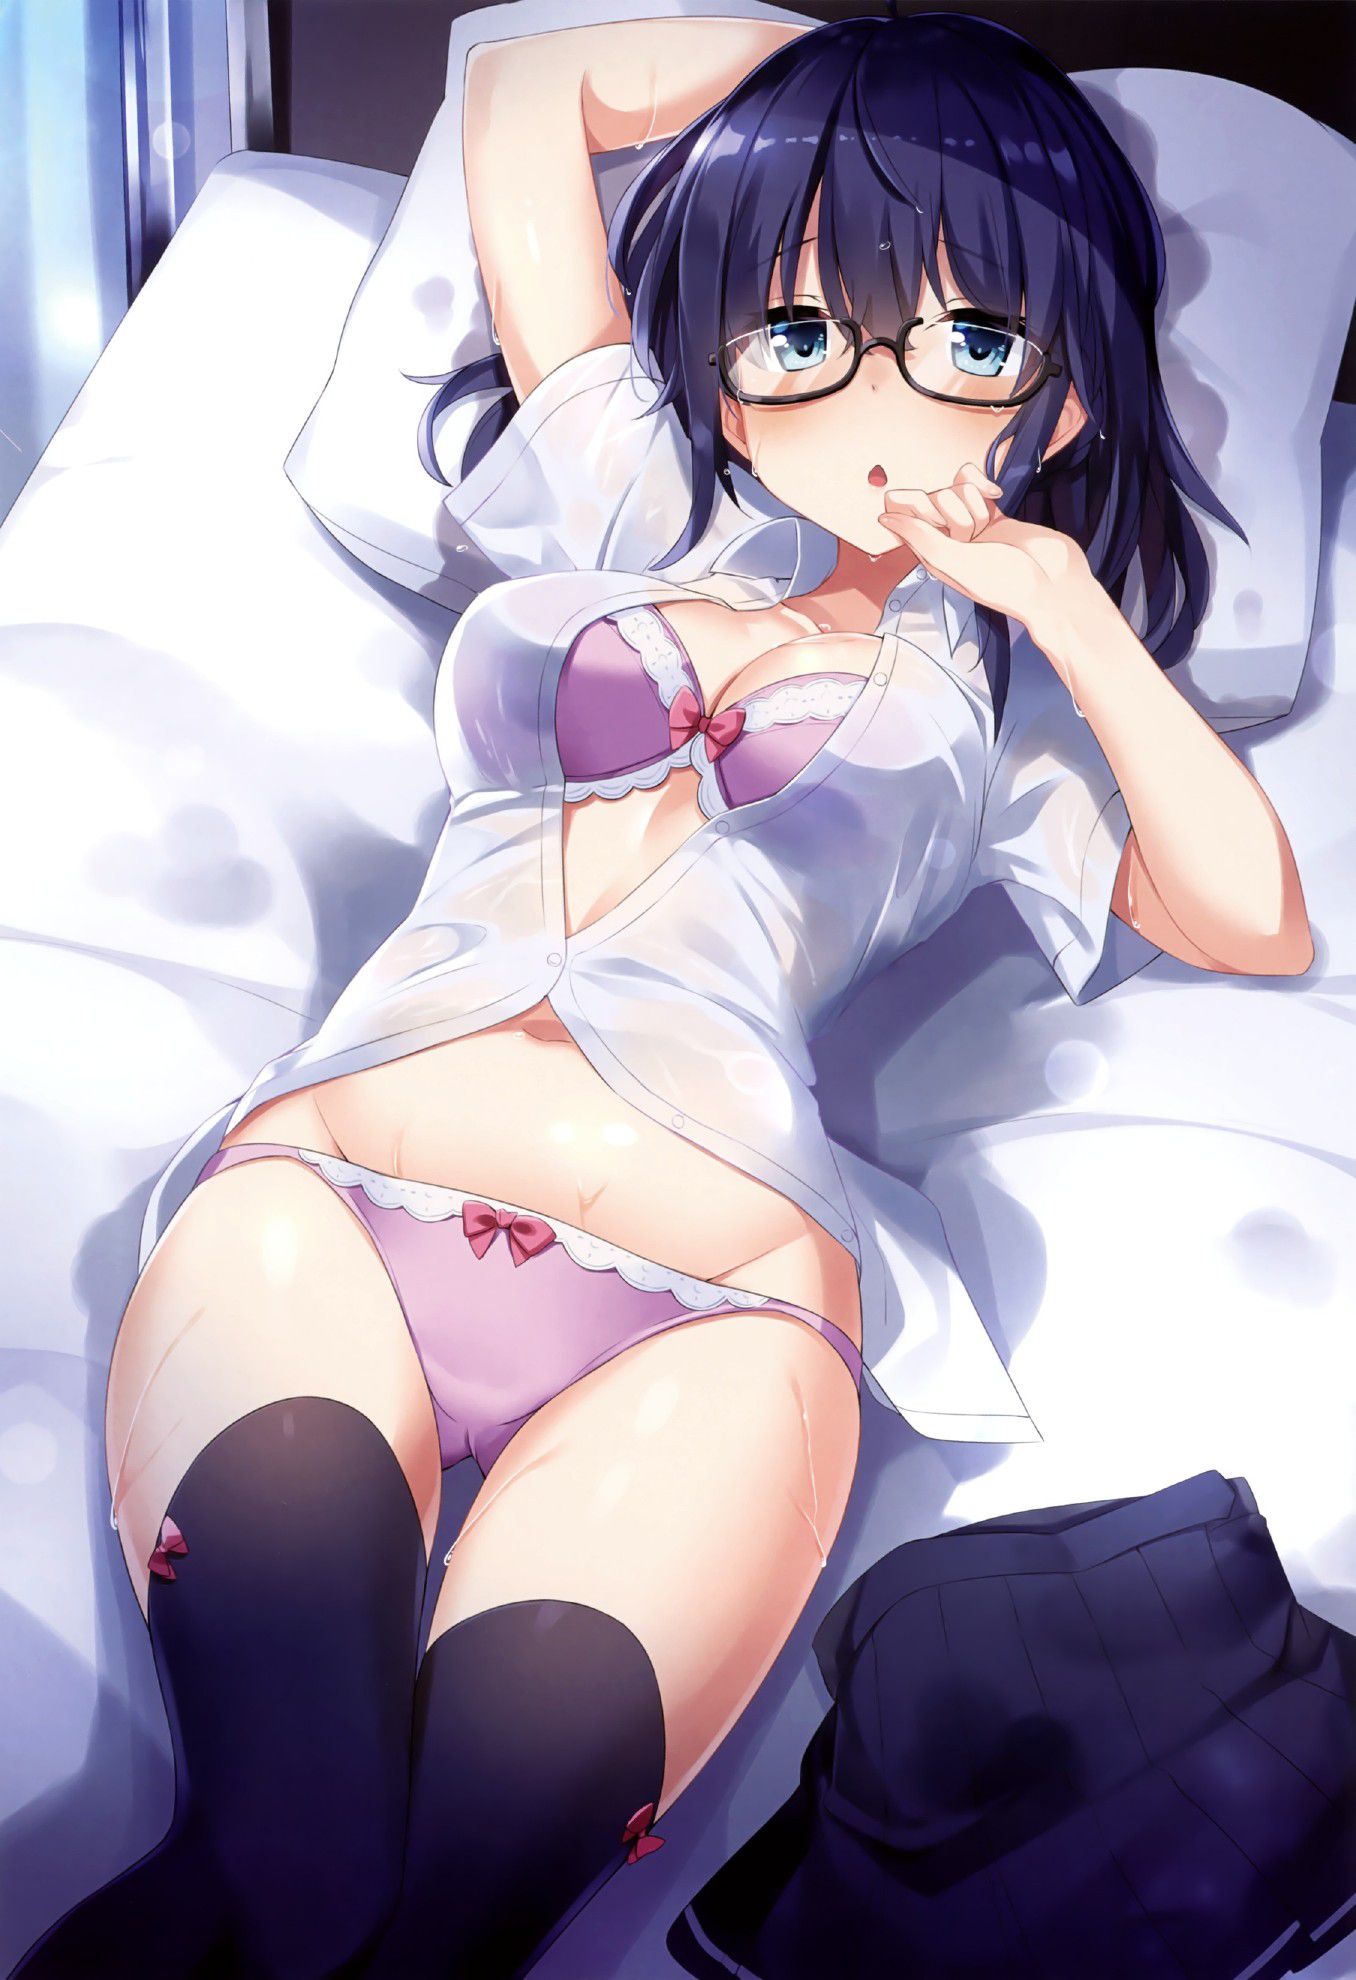 【Secondary erotica】Here is an erotic image where you can worship the etched figure of the glasses girl 3